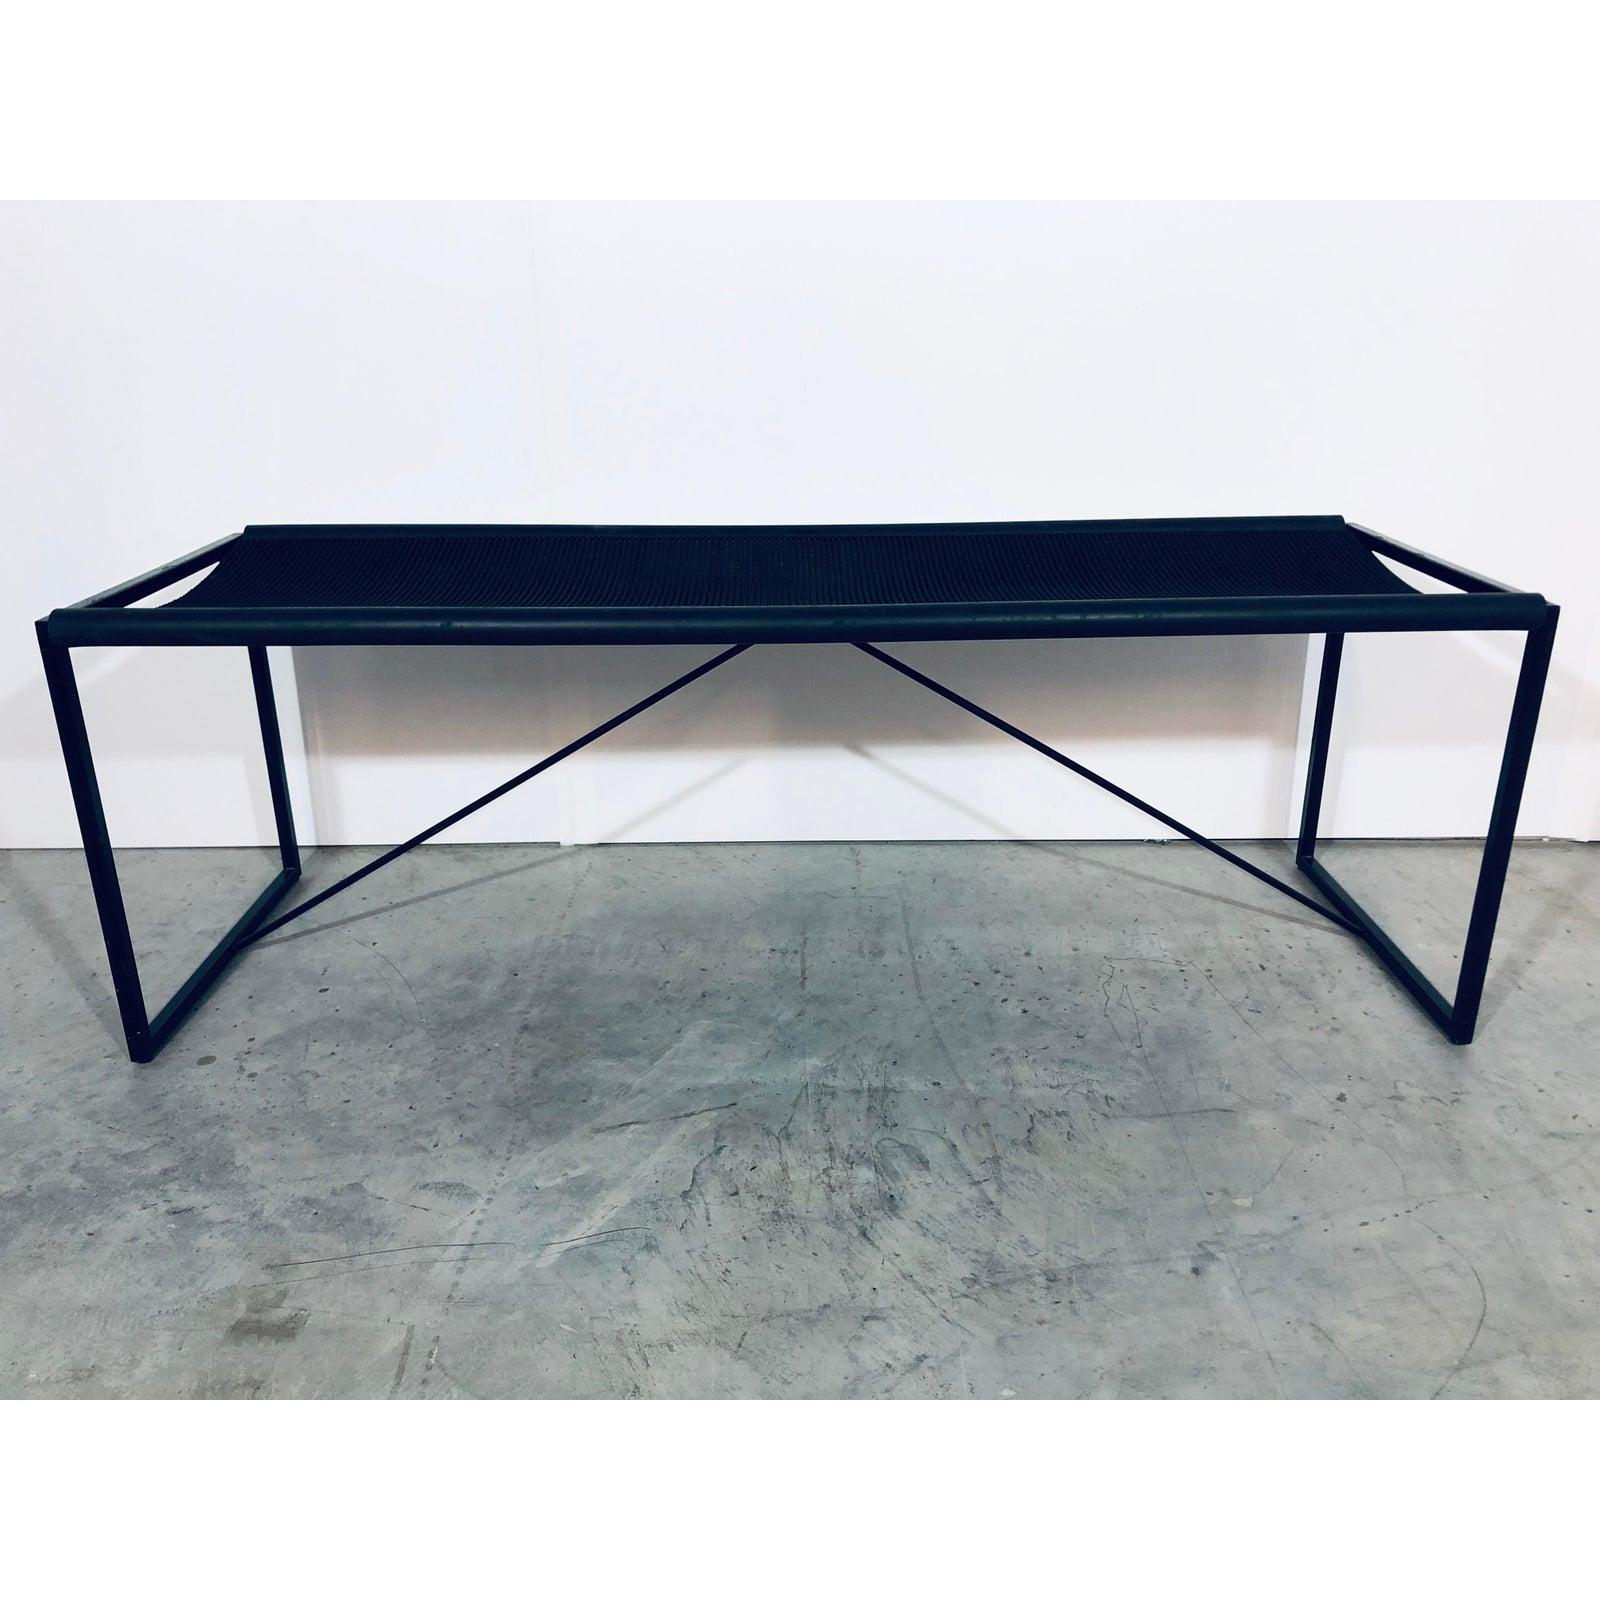 Maurizio Peregalli Modernist Bench for Zues, Italy, 1980s For Sale 3